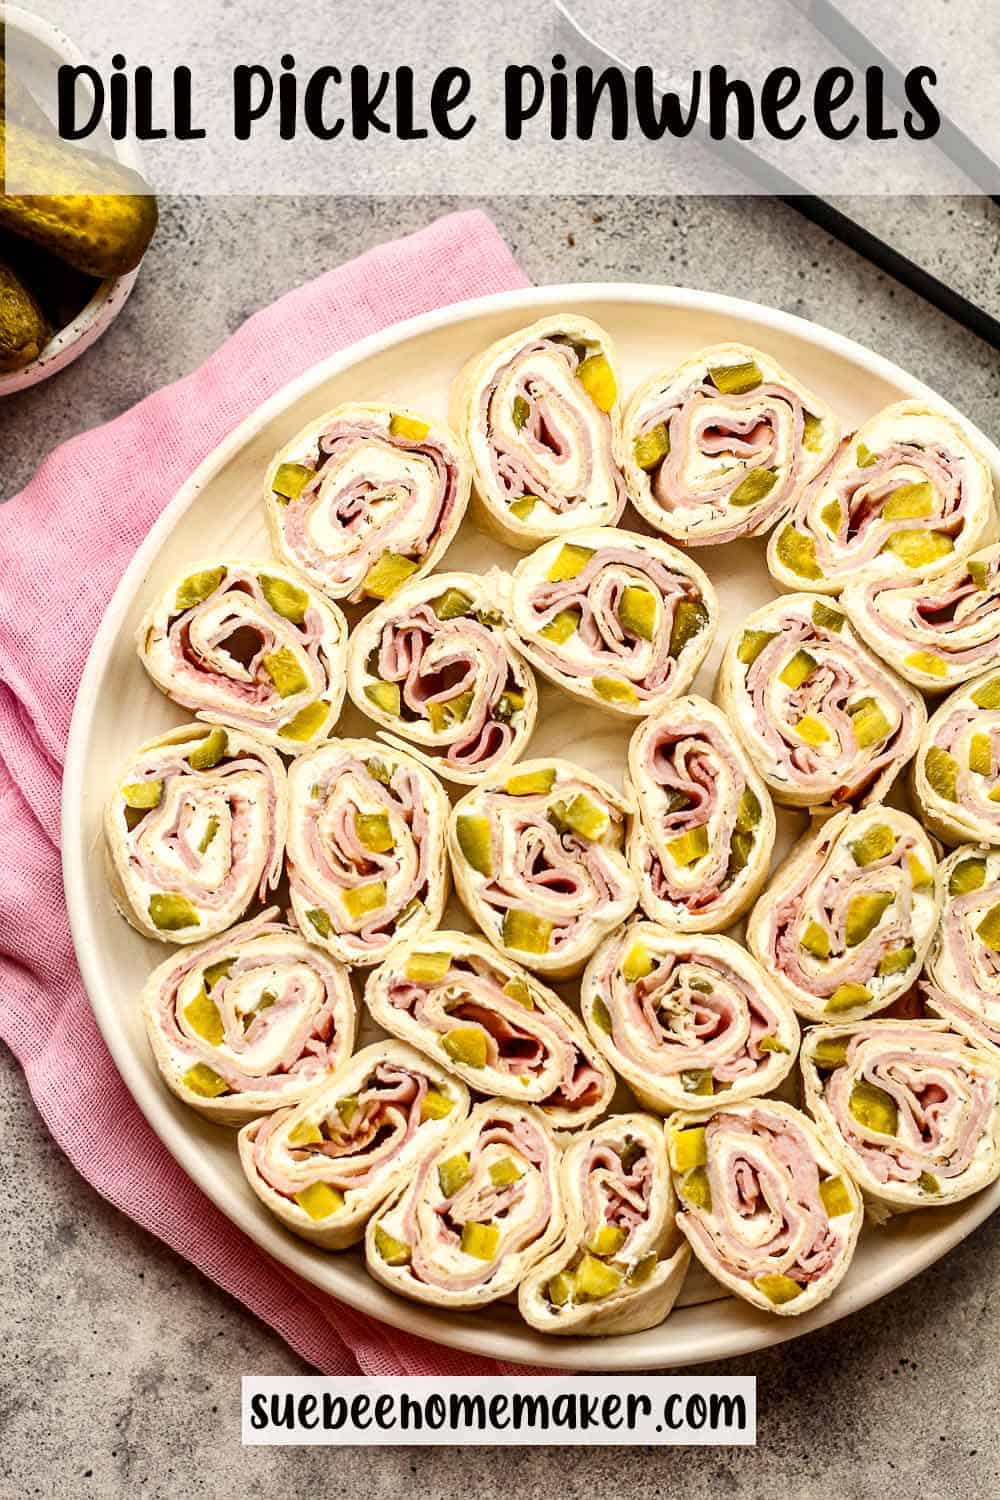 A plate of dill pickle pinwheels with a pink napkin.